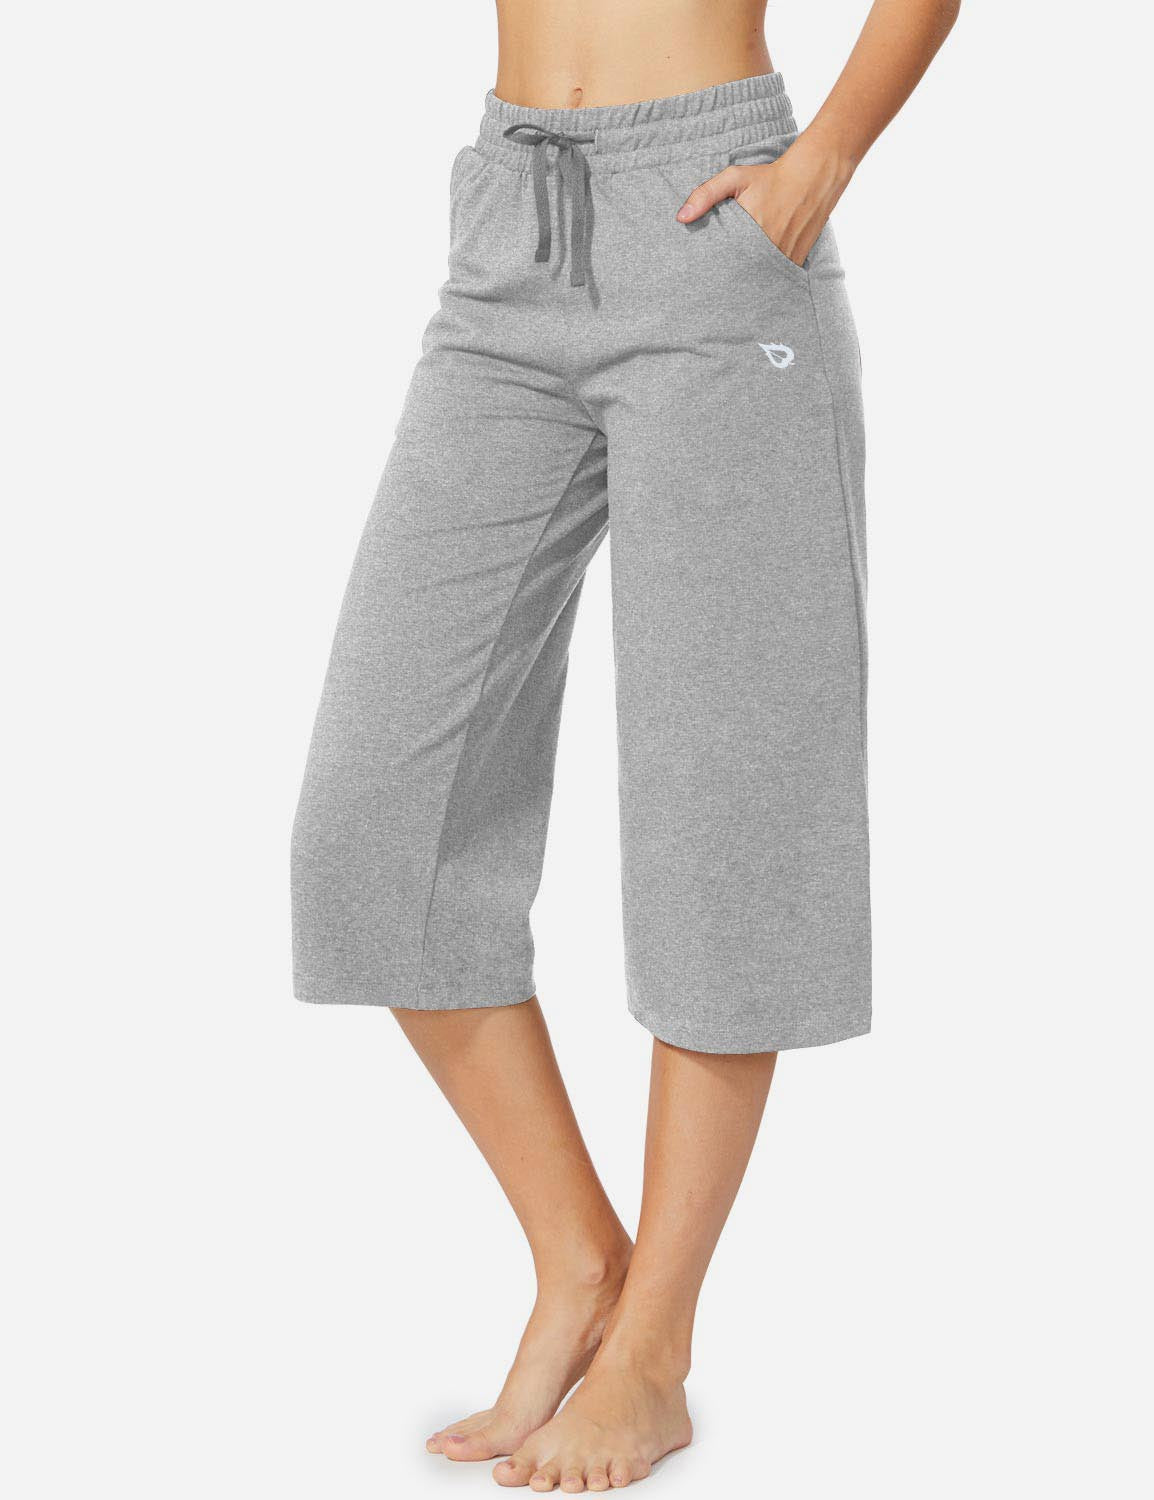 Baleaf Women's 20'' High Rise Drawcord Loose Fit Pocketed Sweatpants abh107 Light Gray Side